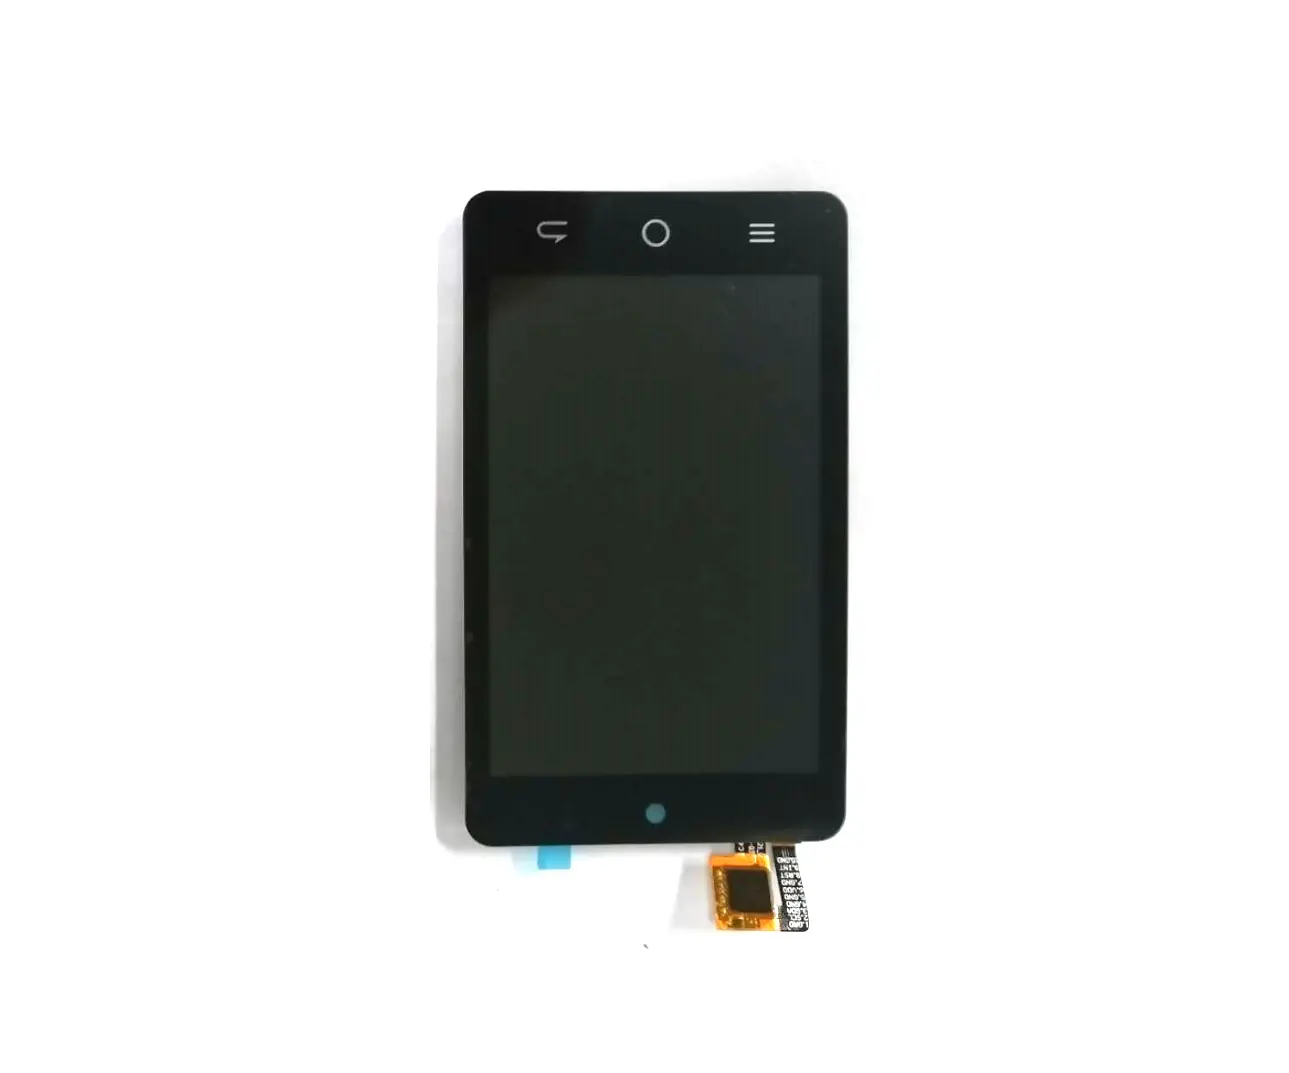 ST7796S IPS24 PIN 3.5 inchs TFT lcd touch screen module